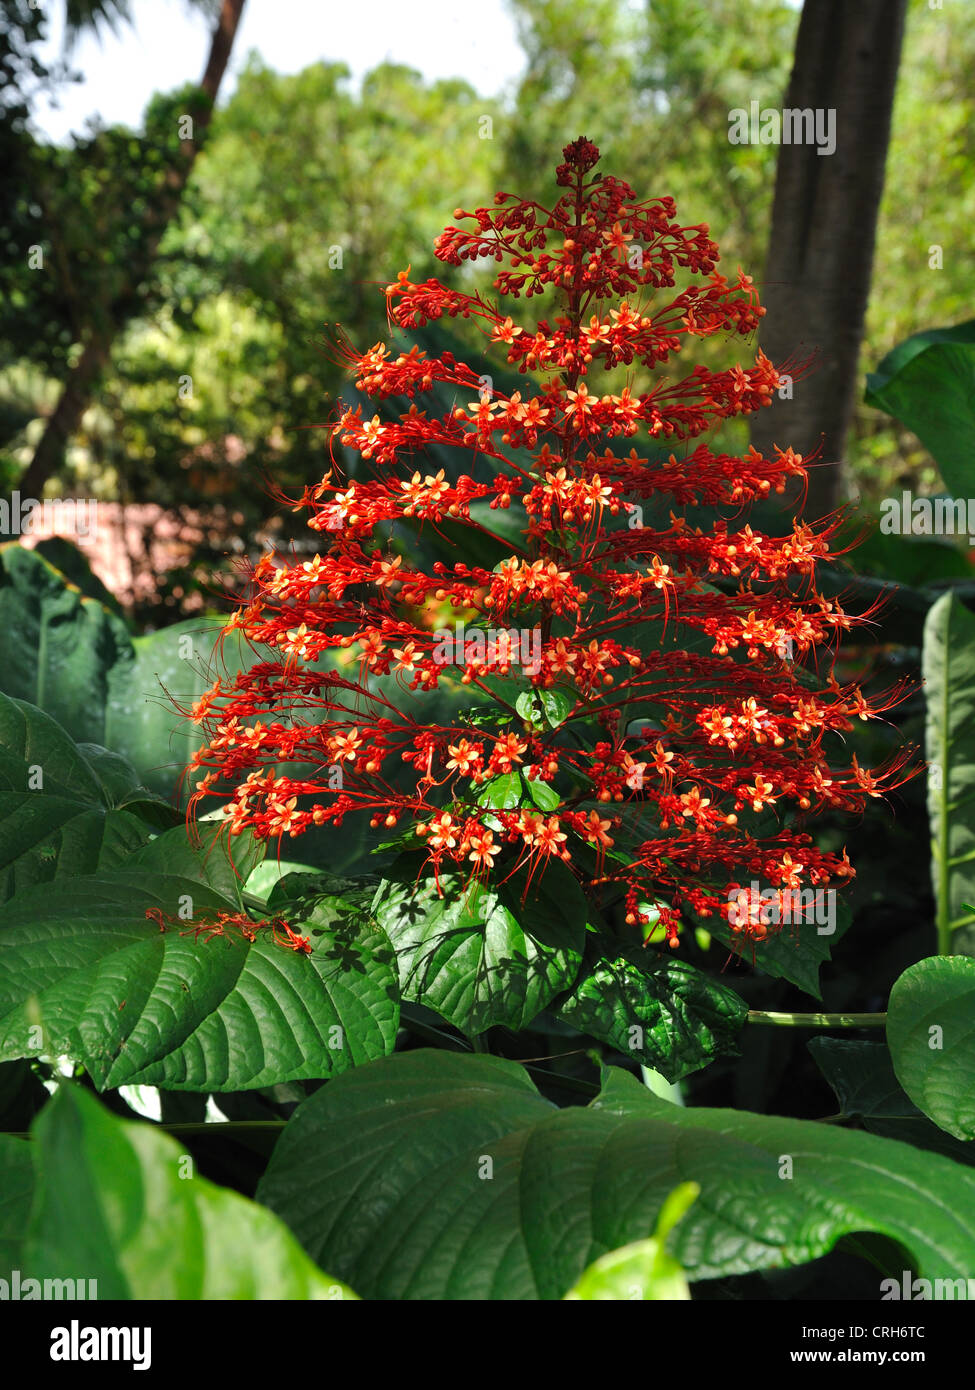 Pagoda flower - Clerodendrum paniculatum above large green leaves. Stock Photo